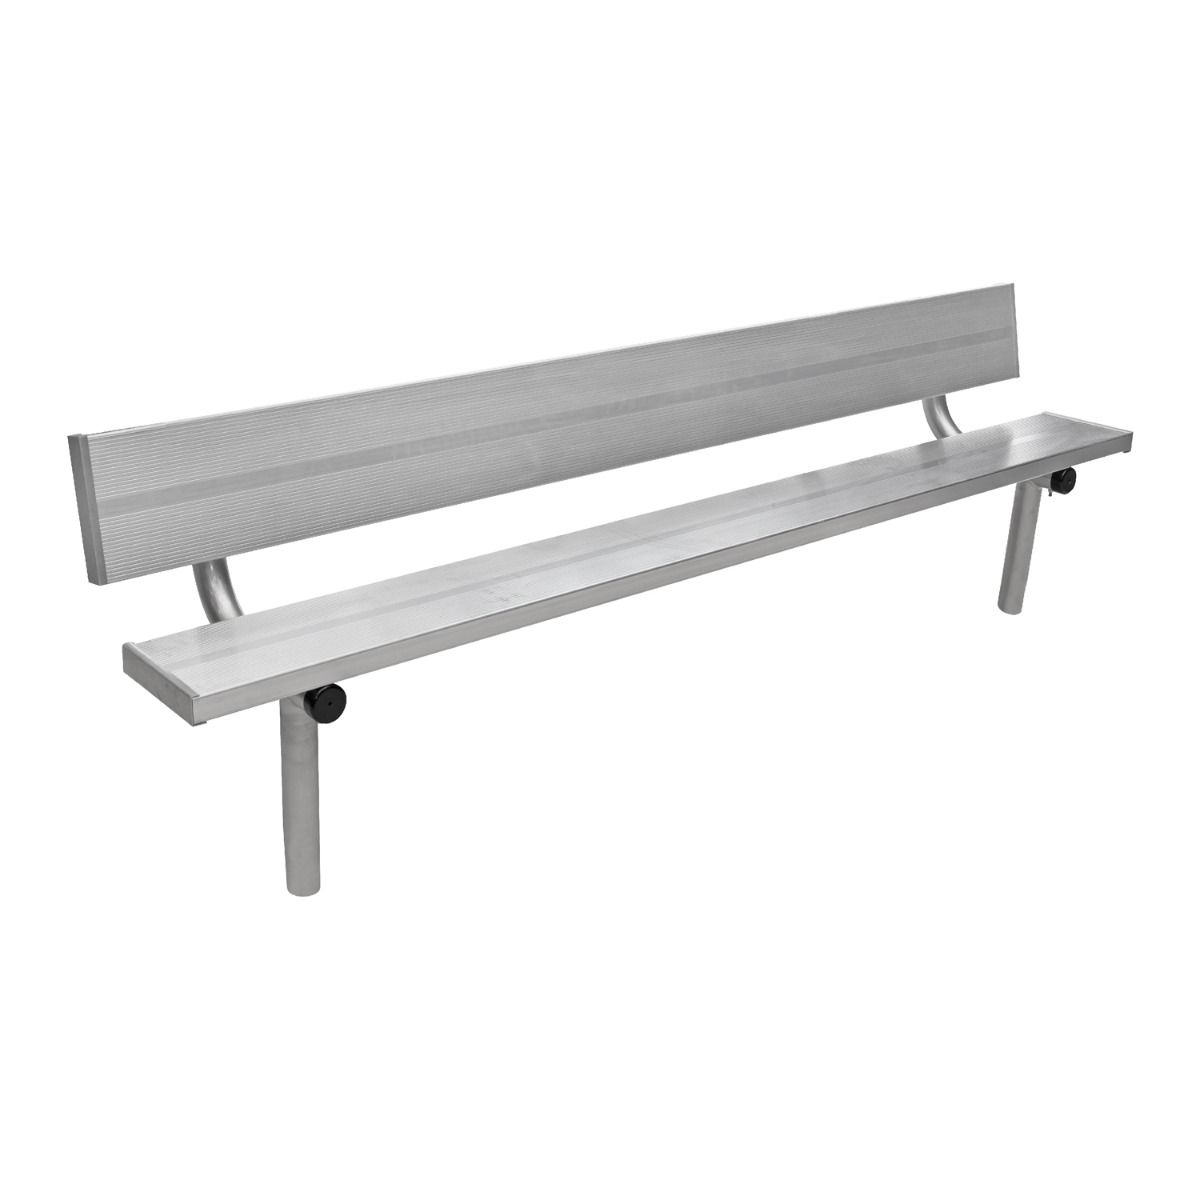 Gill Athletics Stationary Aluminum Bench With Back 8'